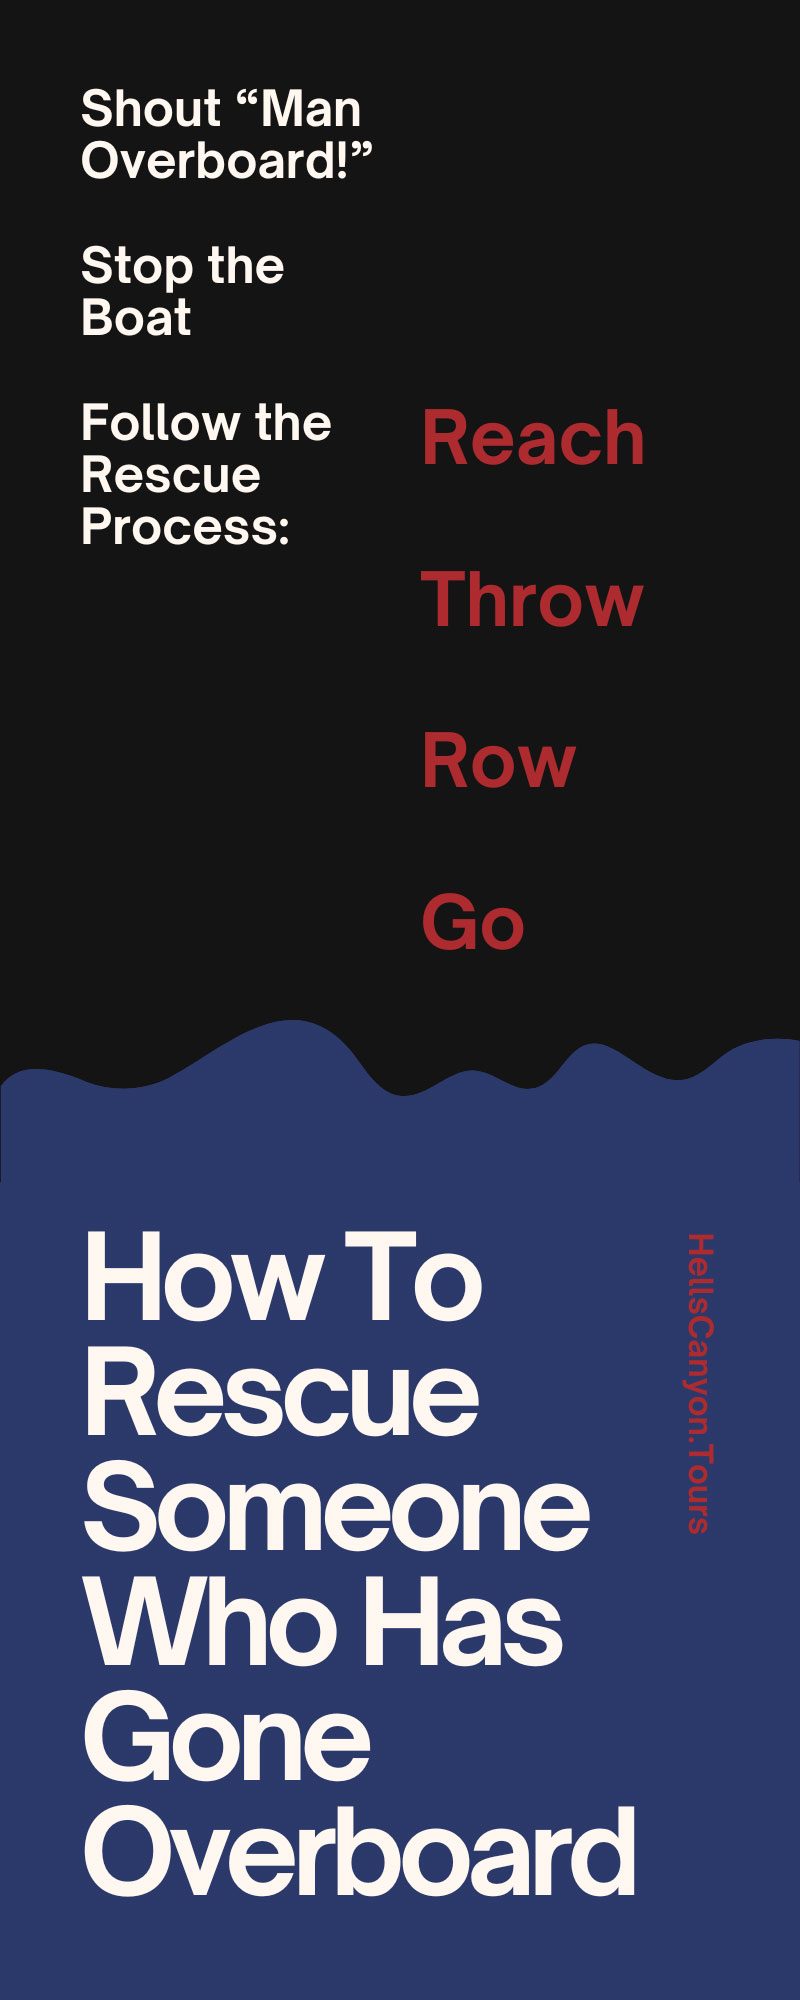 How To Rescue Someone Who Has Gone Overboard